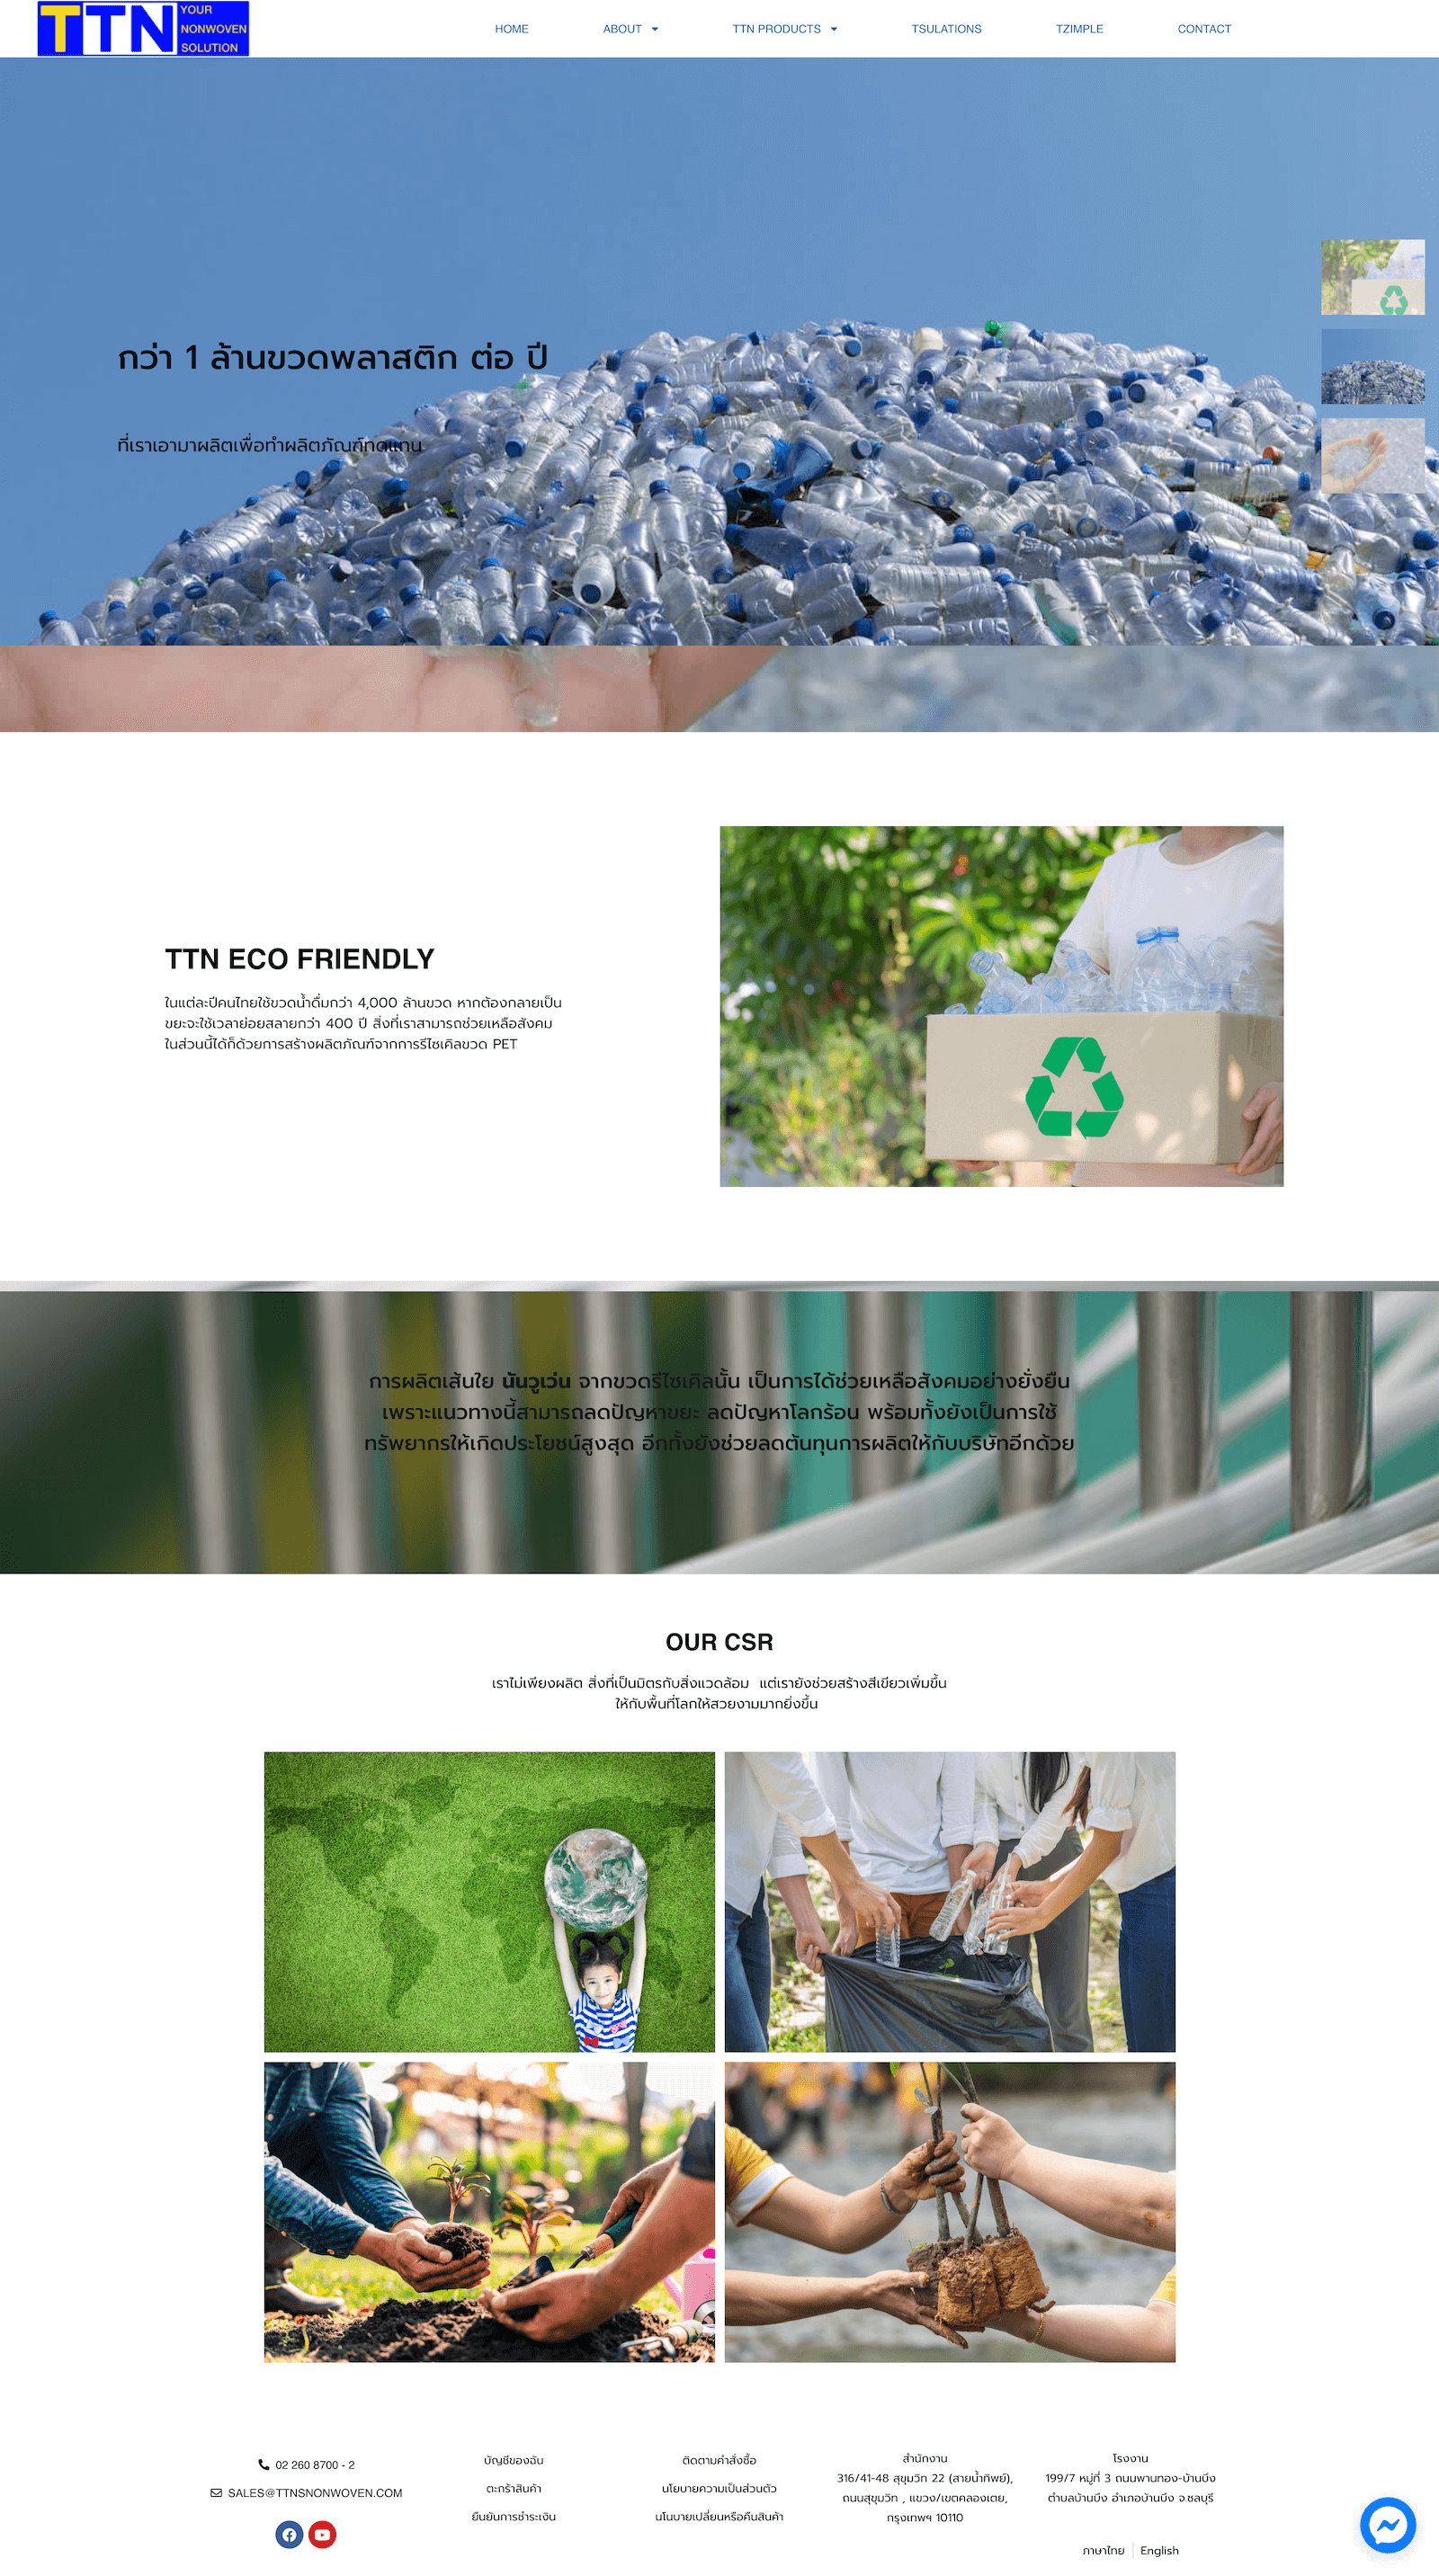 About Eco